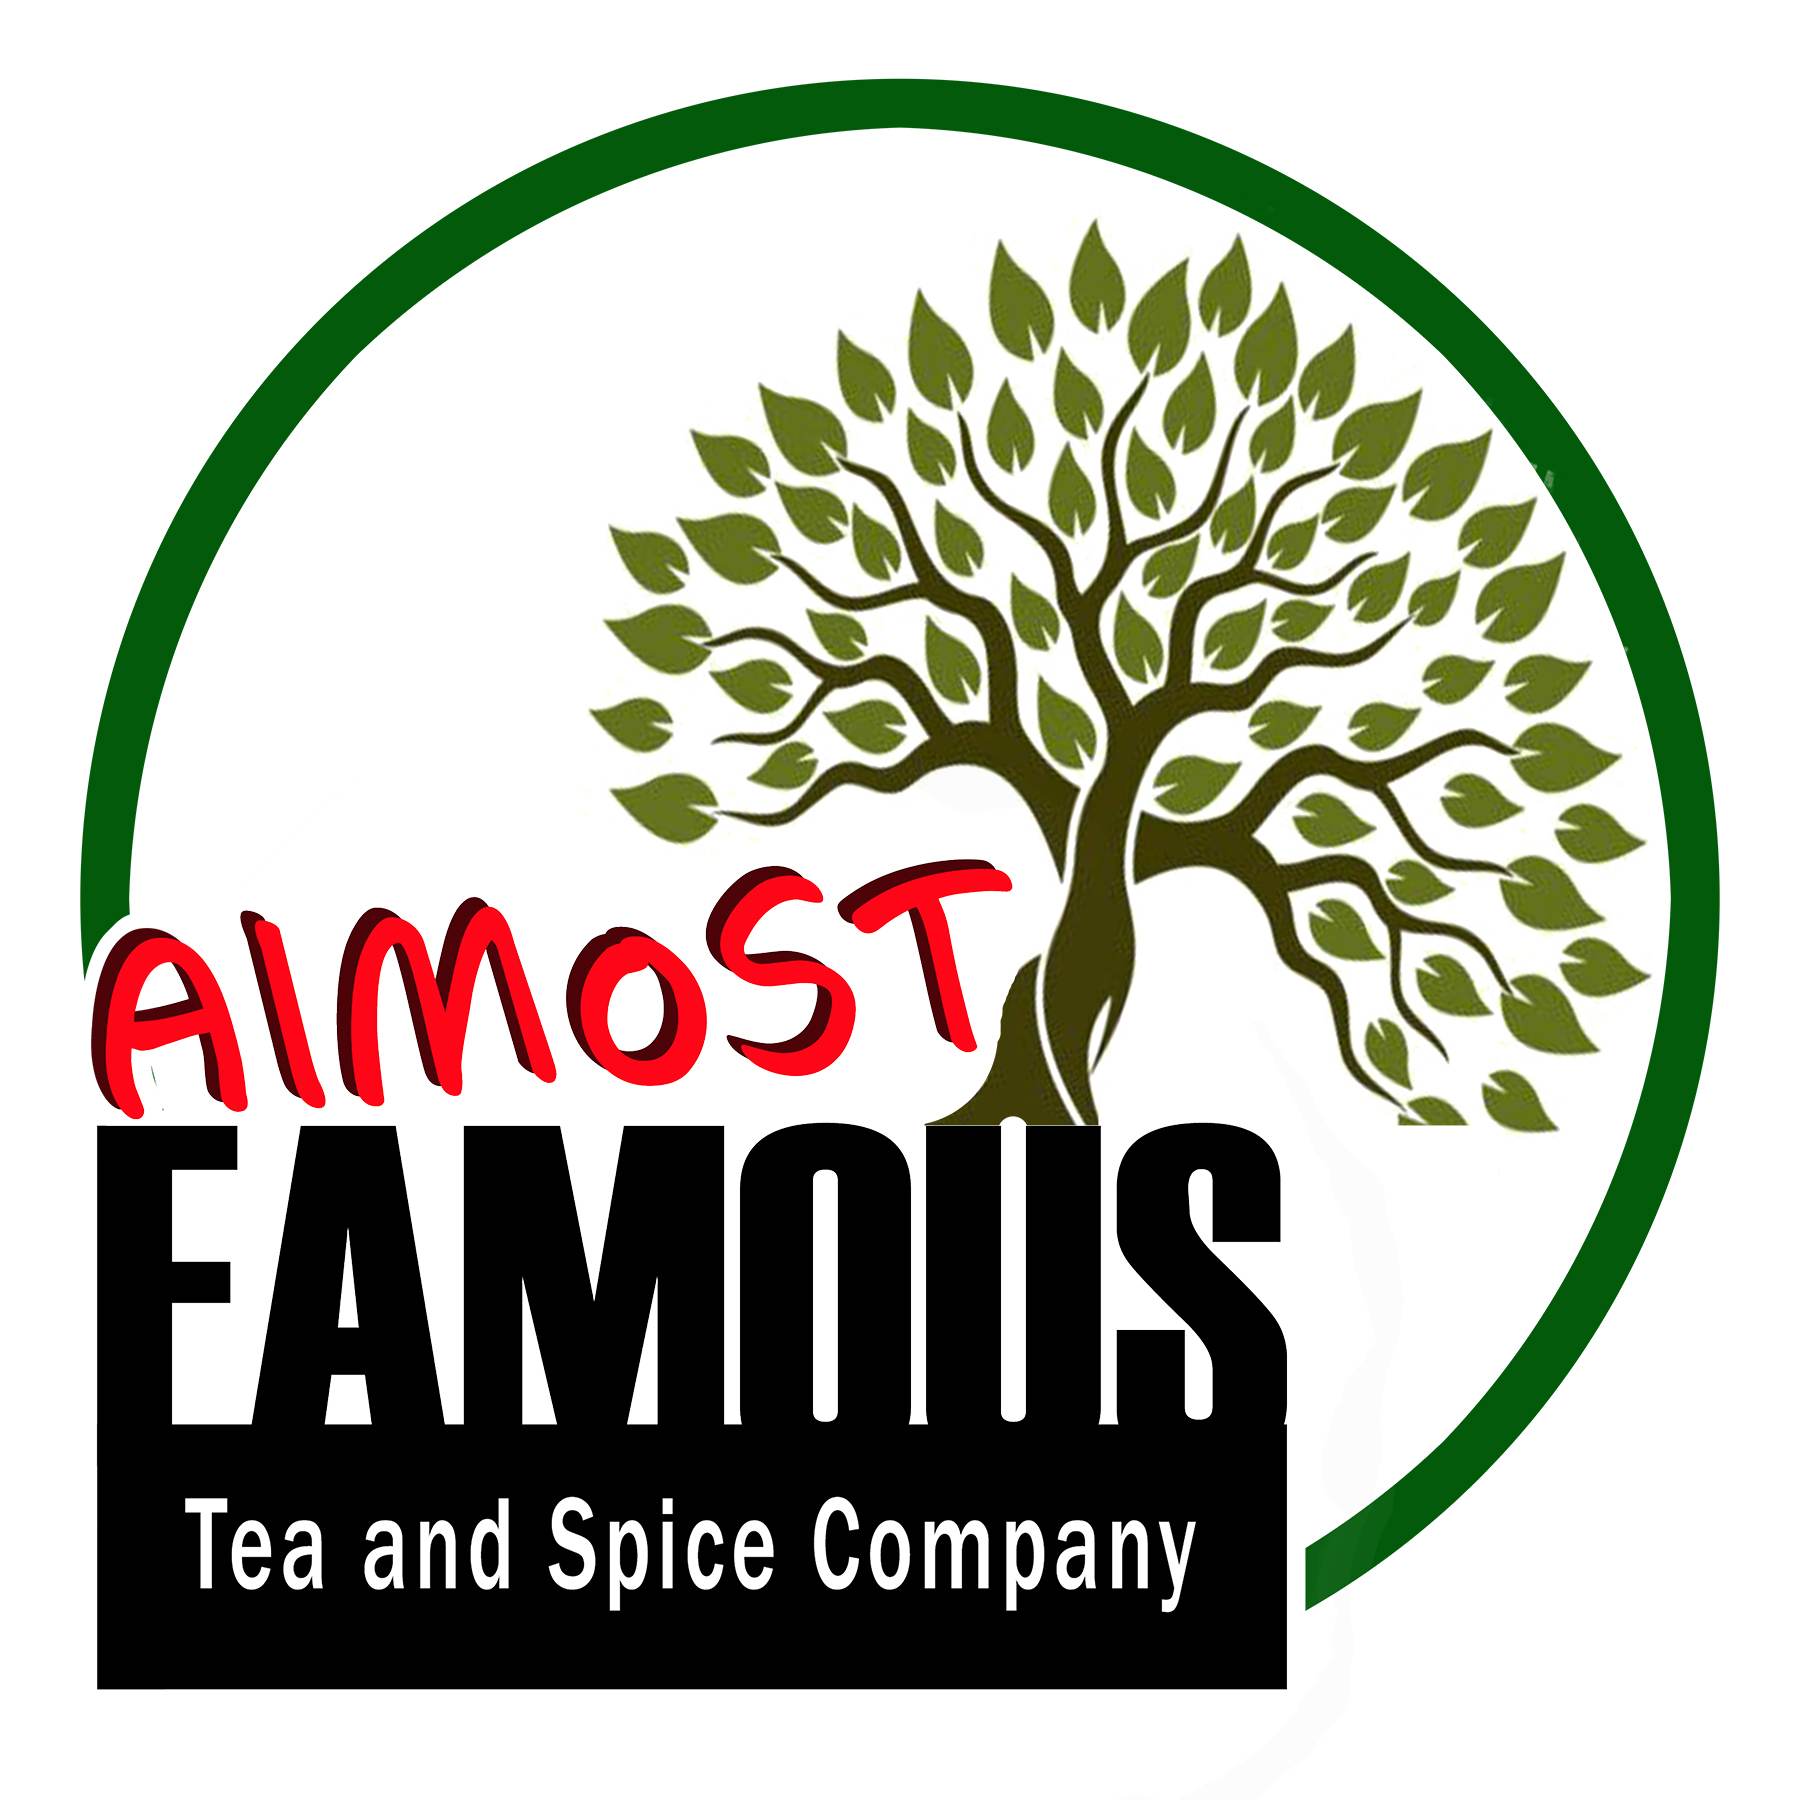 Almost Famous Tea and Spice company